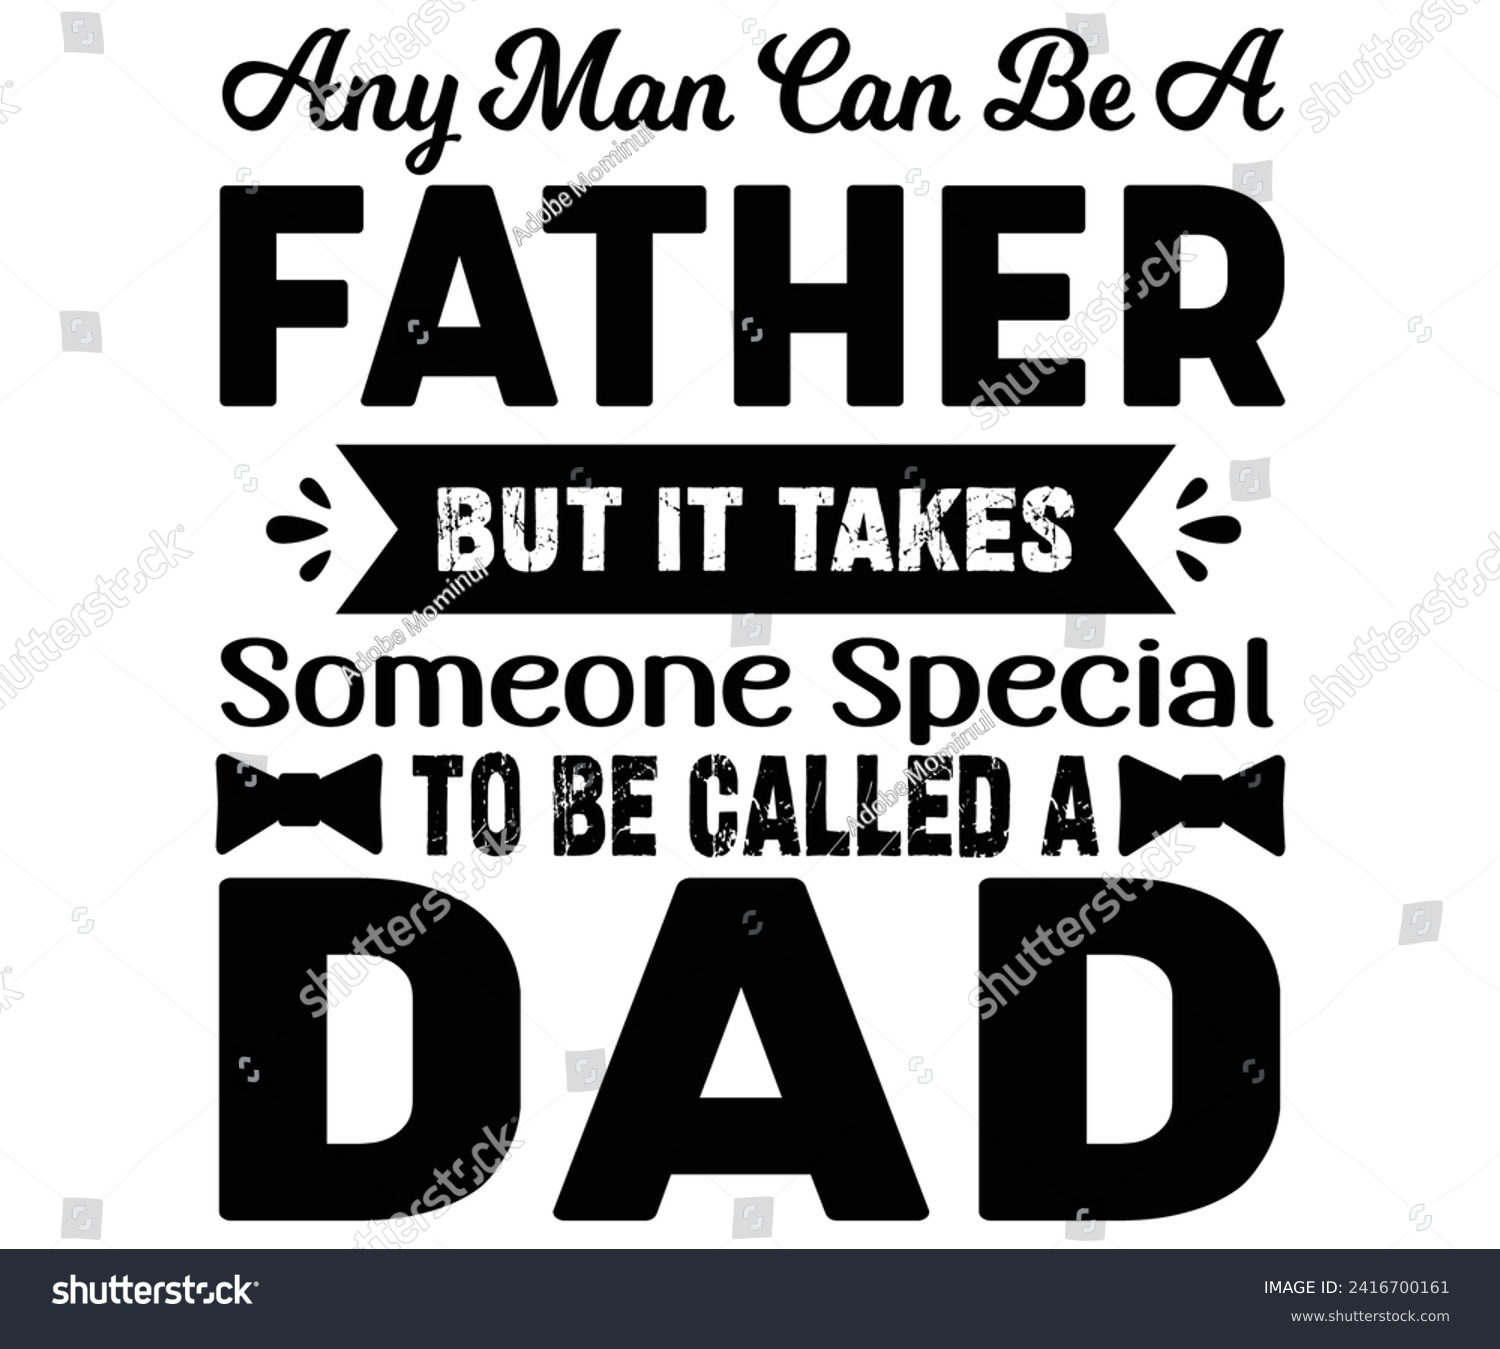 SVG of Any Man Can Be a Father But It Takes Someone Special to Be Called a Dad Svg,Father's Day Svg,Papa svg,Grandpa Svg,Father's Day Saying Qoutes,Dad Svg,Funny Father, Gift For Dad Svg,Daddy Svg,Family svg